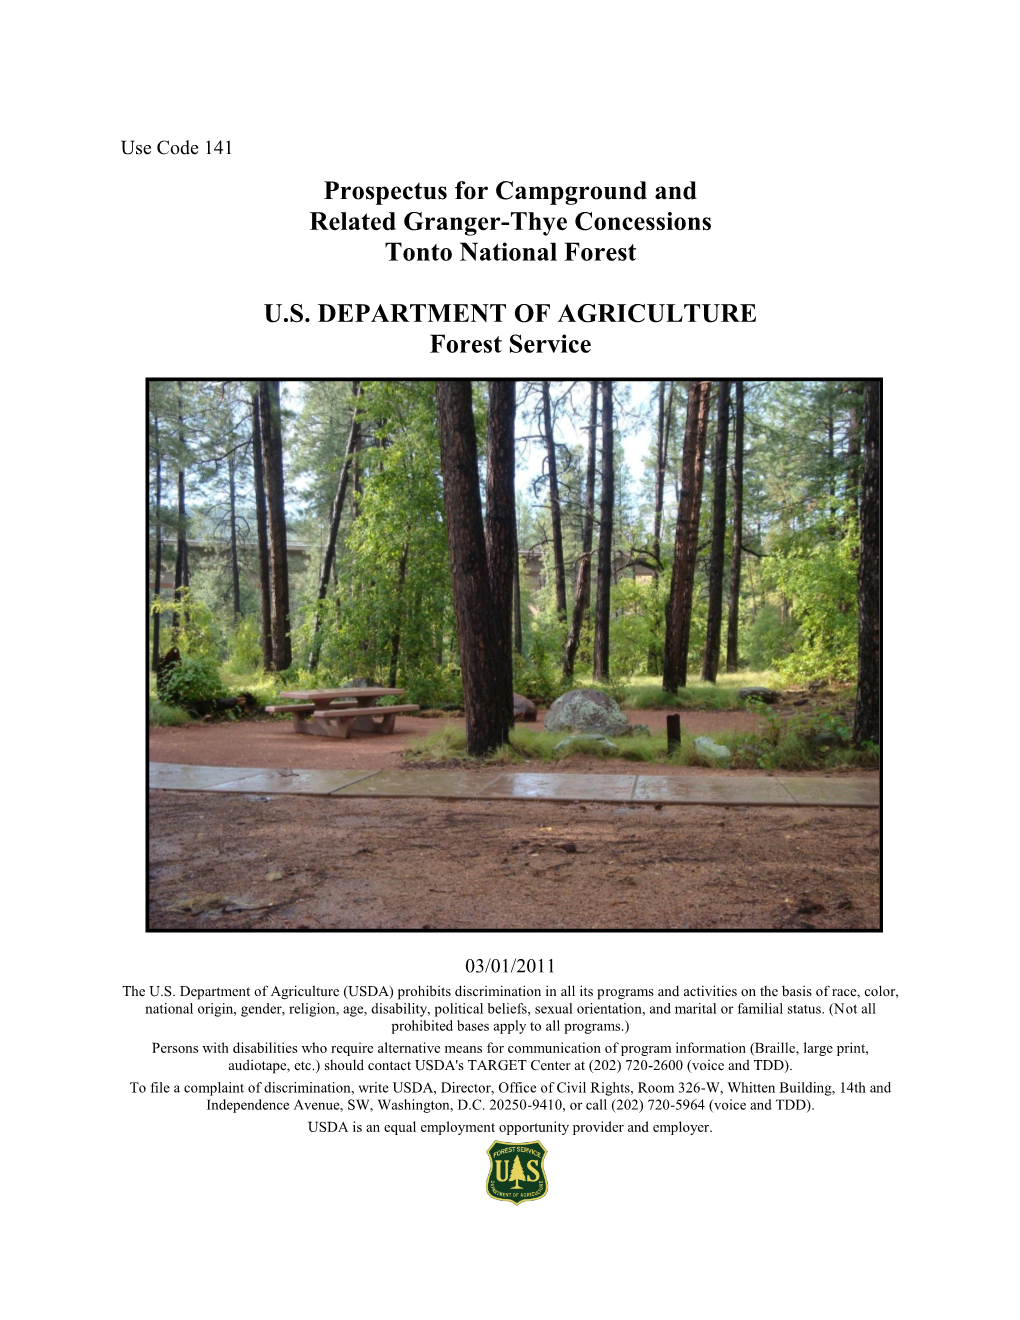 Prospectus for Campground and Related Granger-Thye Concessions Tonto National Forest U.S. DEPARTMENT of AGRICULTURE Forest Servi